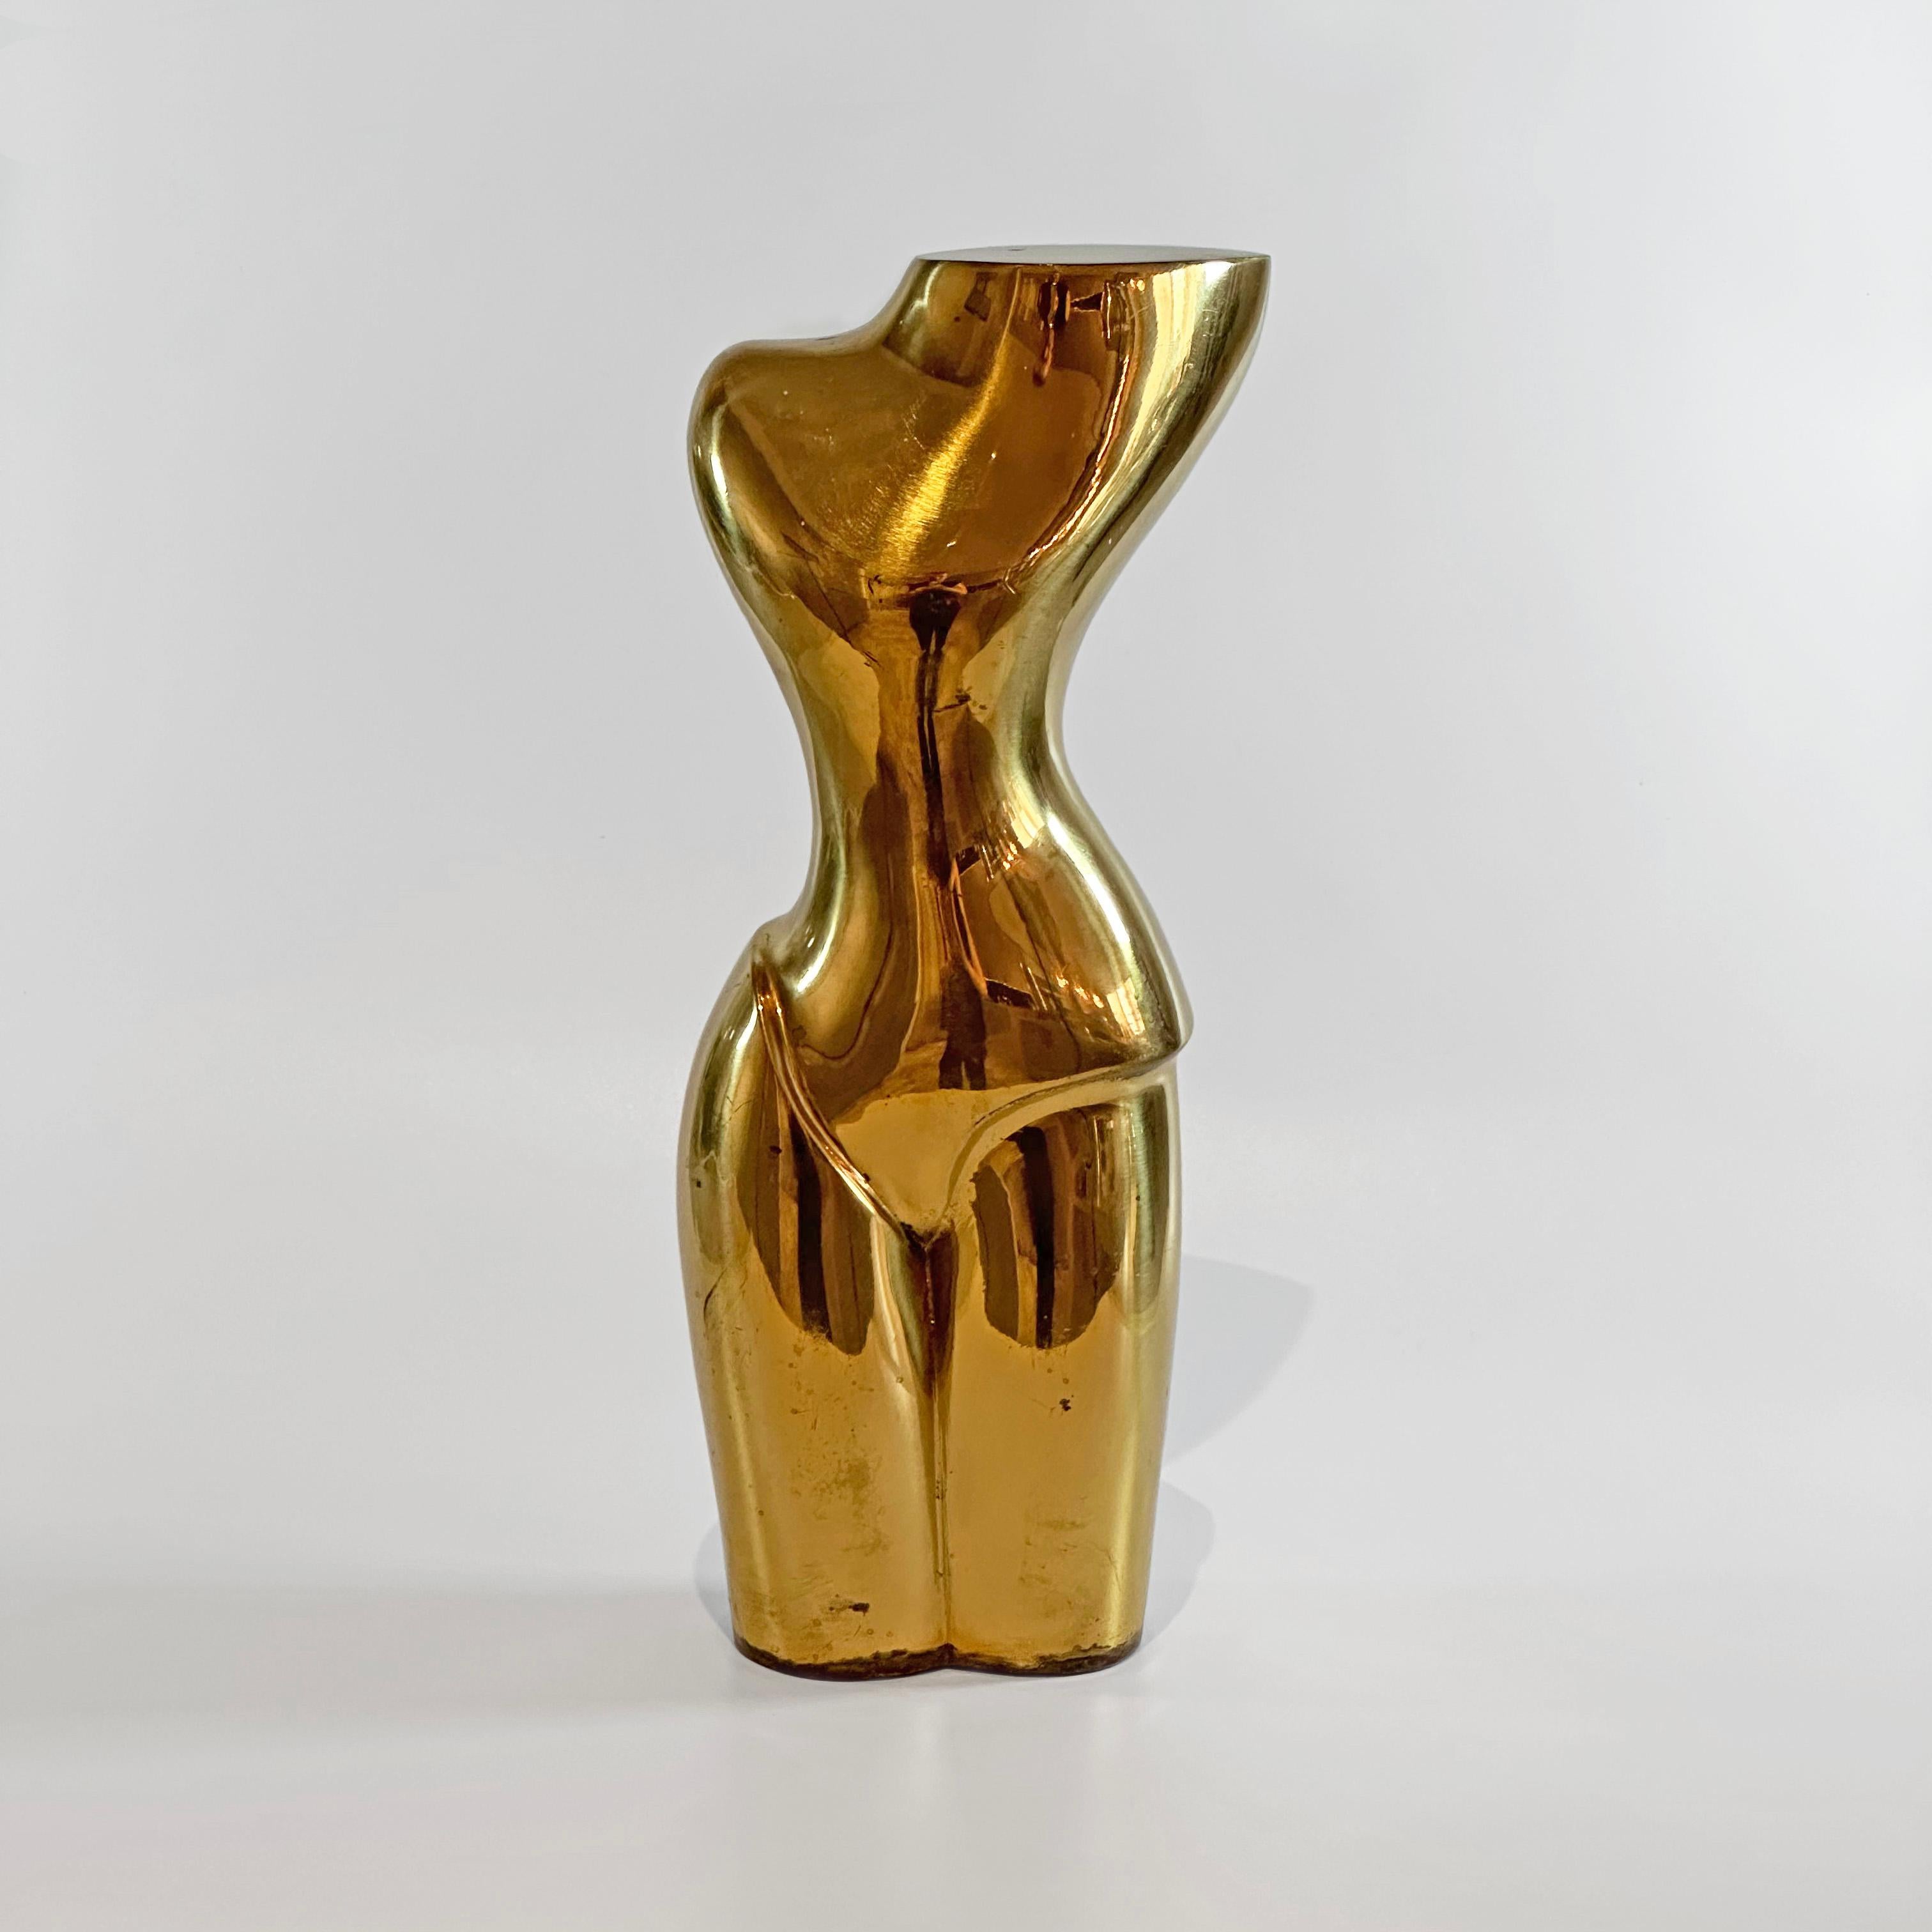 This exquisite Almazan brass figure is a testament to the refined aesthetics of 1970s Spain, embodying the era's modernist verve with a nod to the stylized forms reminiscent of Tamara de Lempicka's work. The figure's silhouette flows with soft,